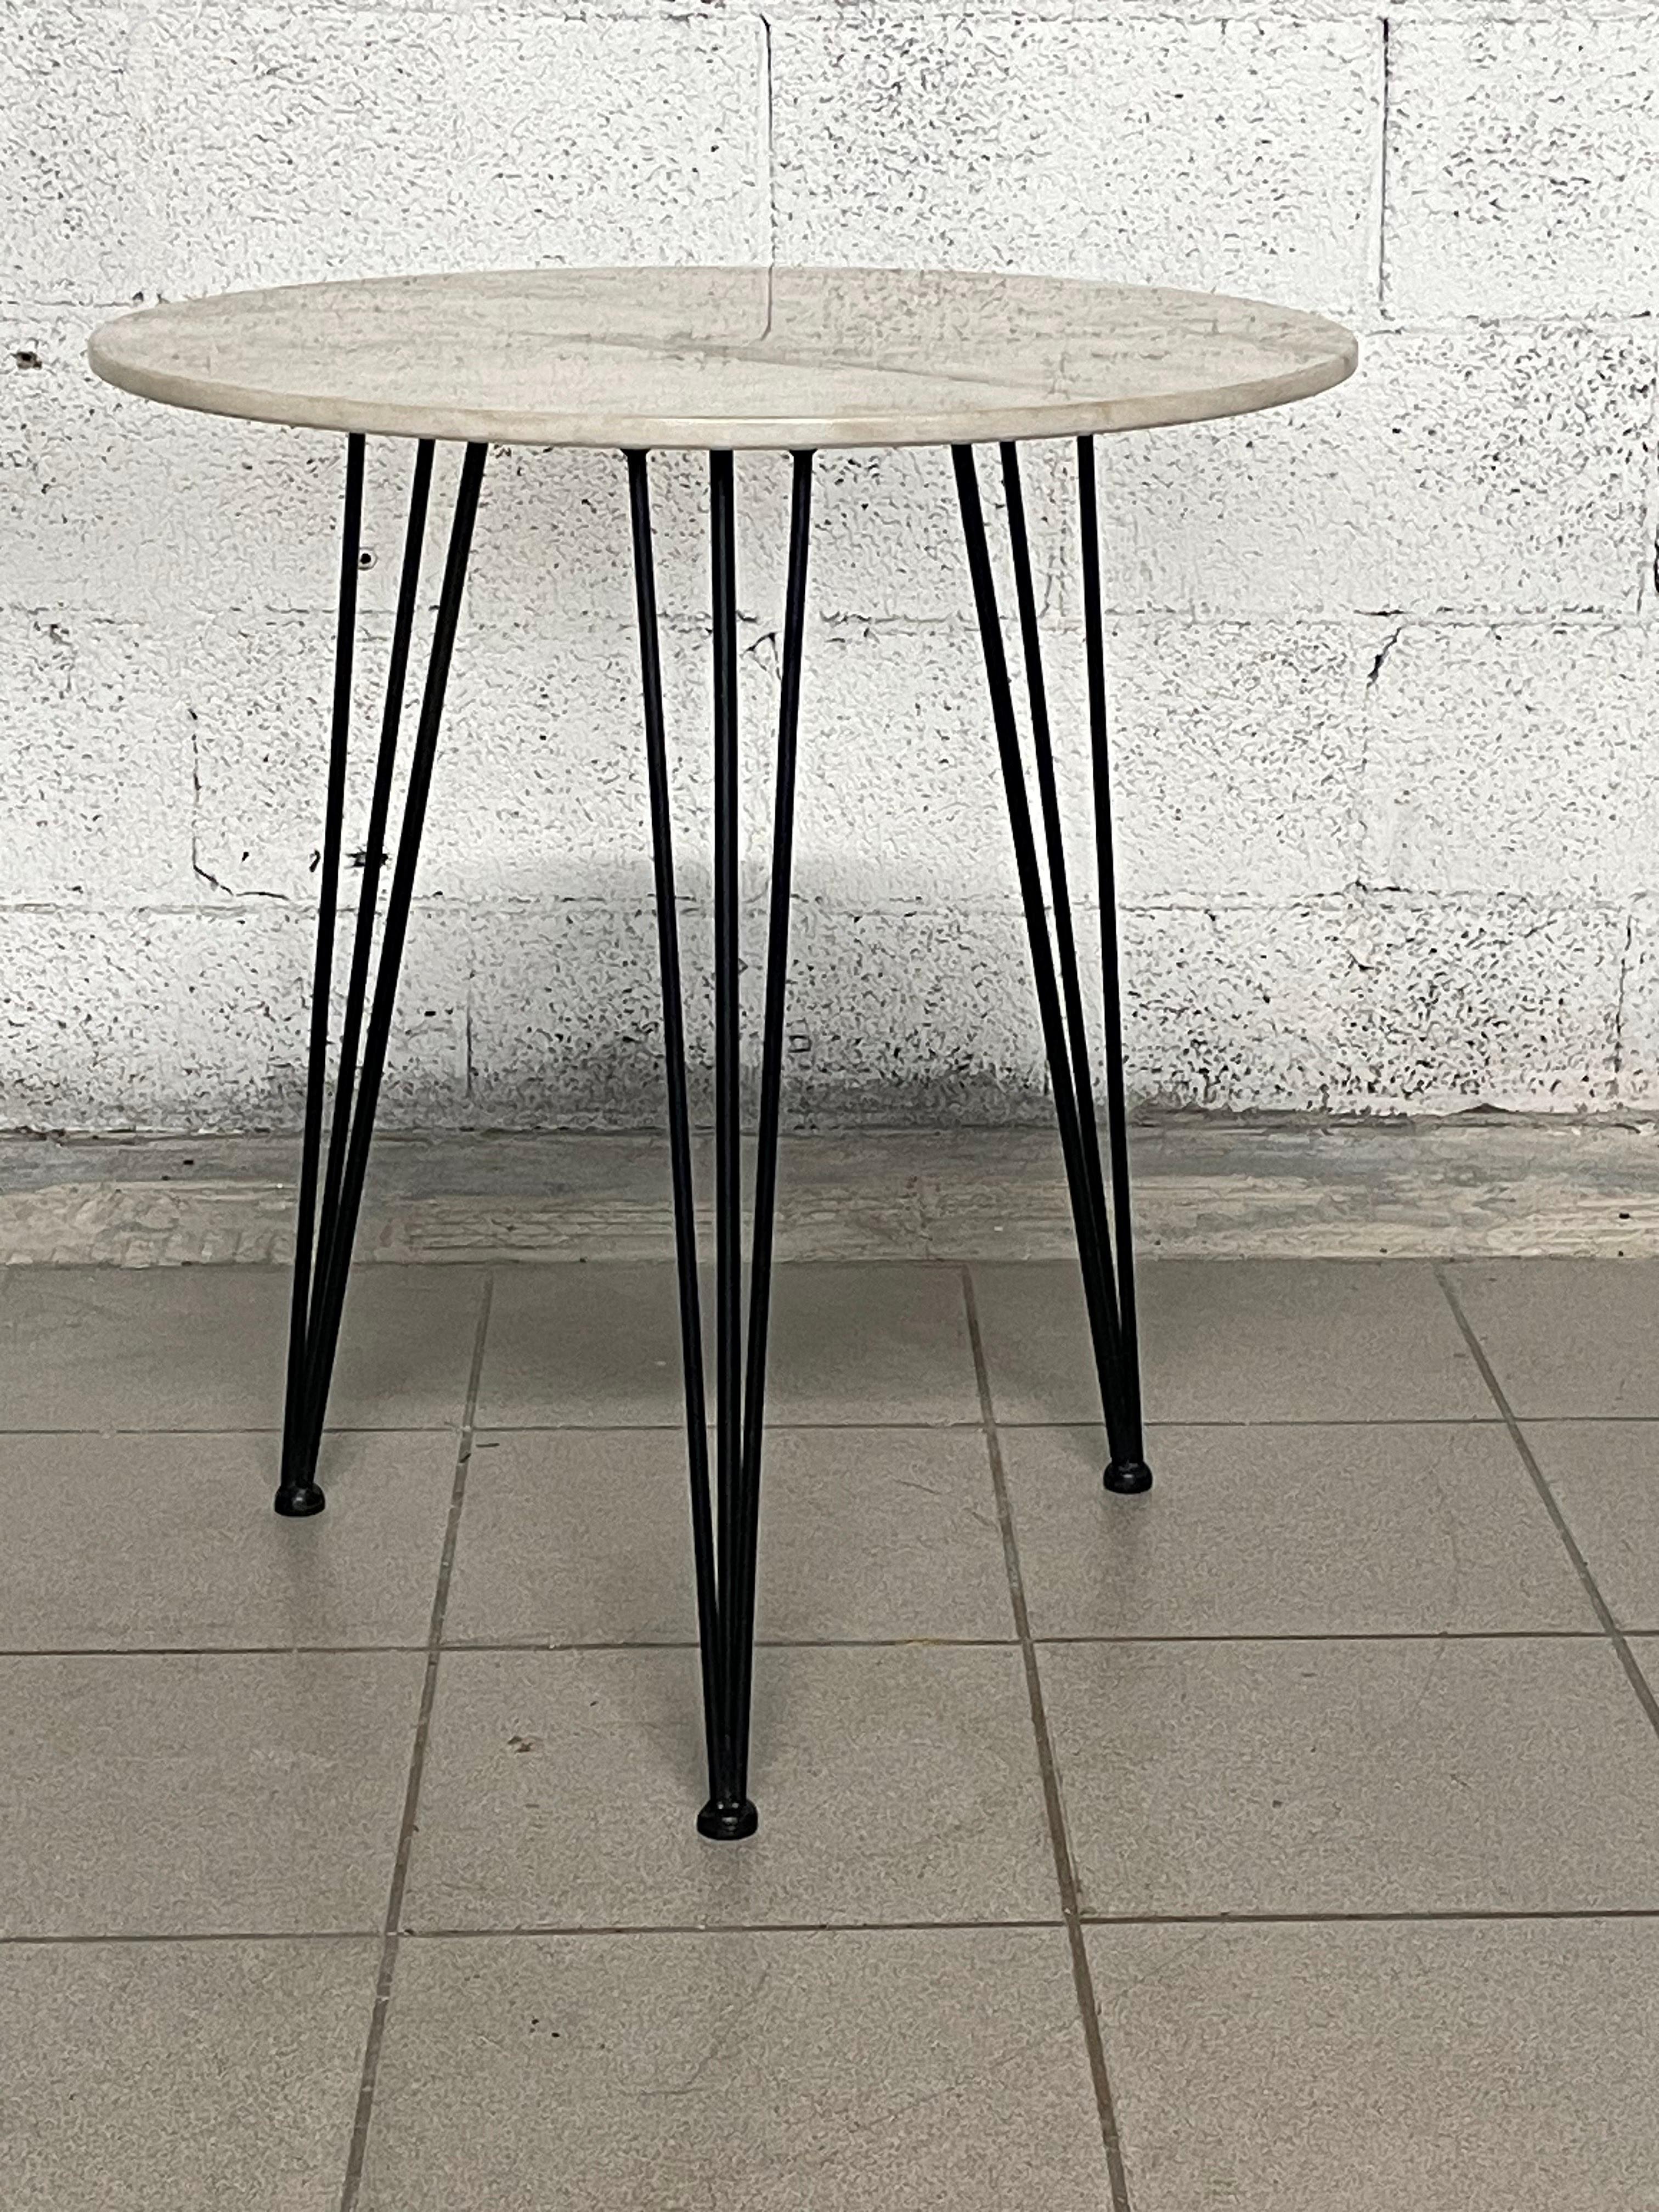 1950s service table.

Black painted metal tripod frame and white marble top.
Very elegant and functional.